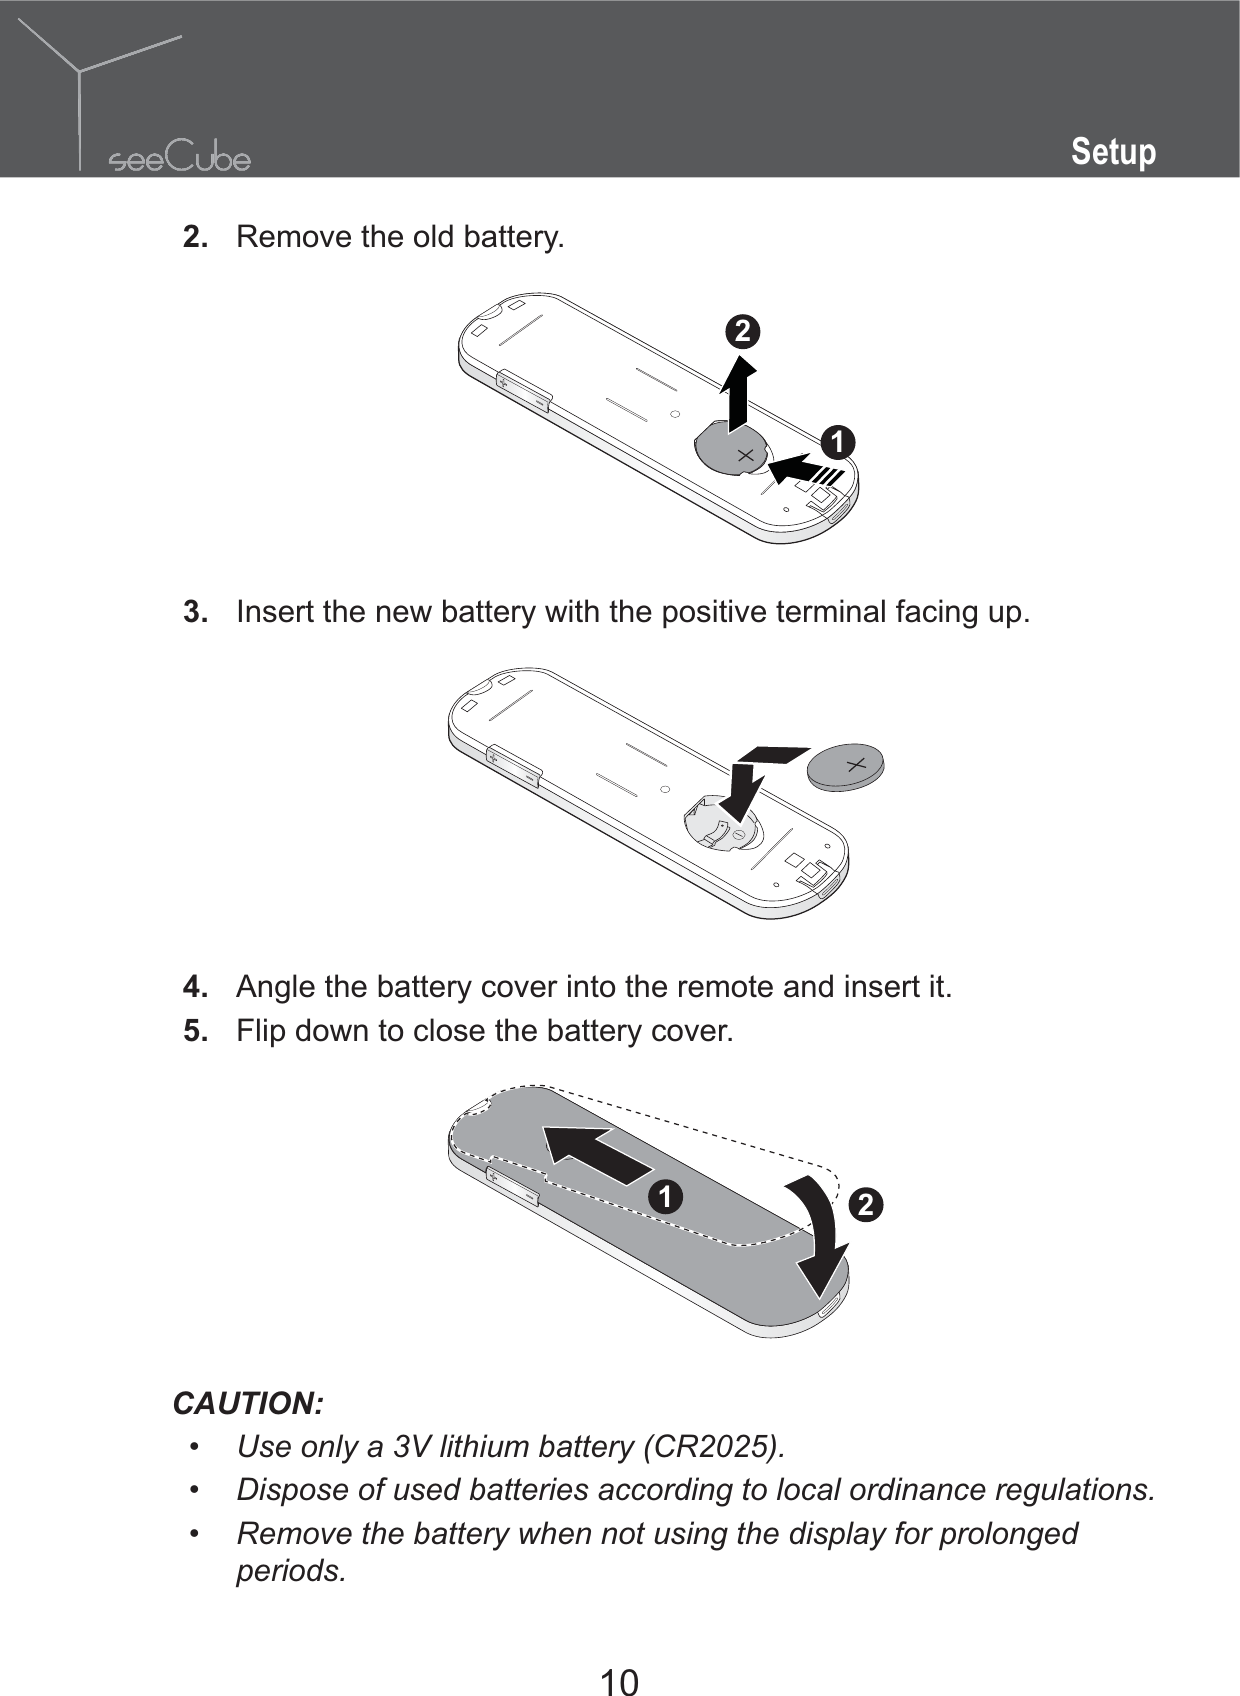 10Setup2.  Remove the old battery.123.  Insert the new battery with the positive terminal facing up.4.  Angle the battery cover into the remote and insert it.5.  Flip down to close the battery cover.21CAUTION: Use only a 3V lithium battery (CR2025). Dispose of used batteries according to local ordinance regulations. Remove the battery when not using the display for prolonged periods.